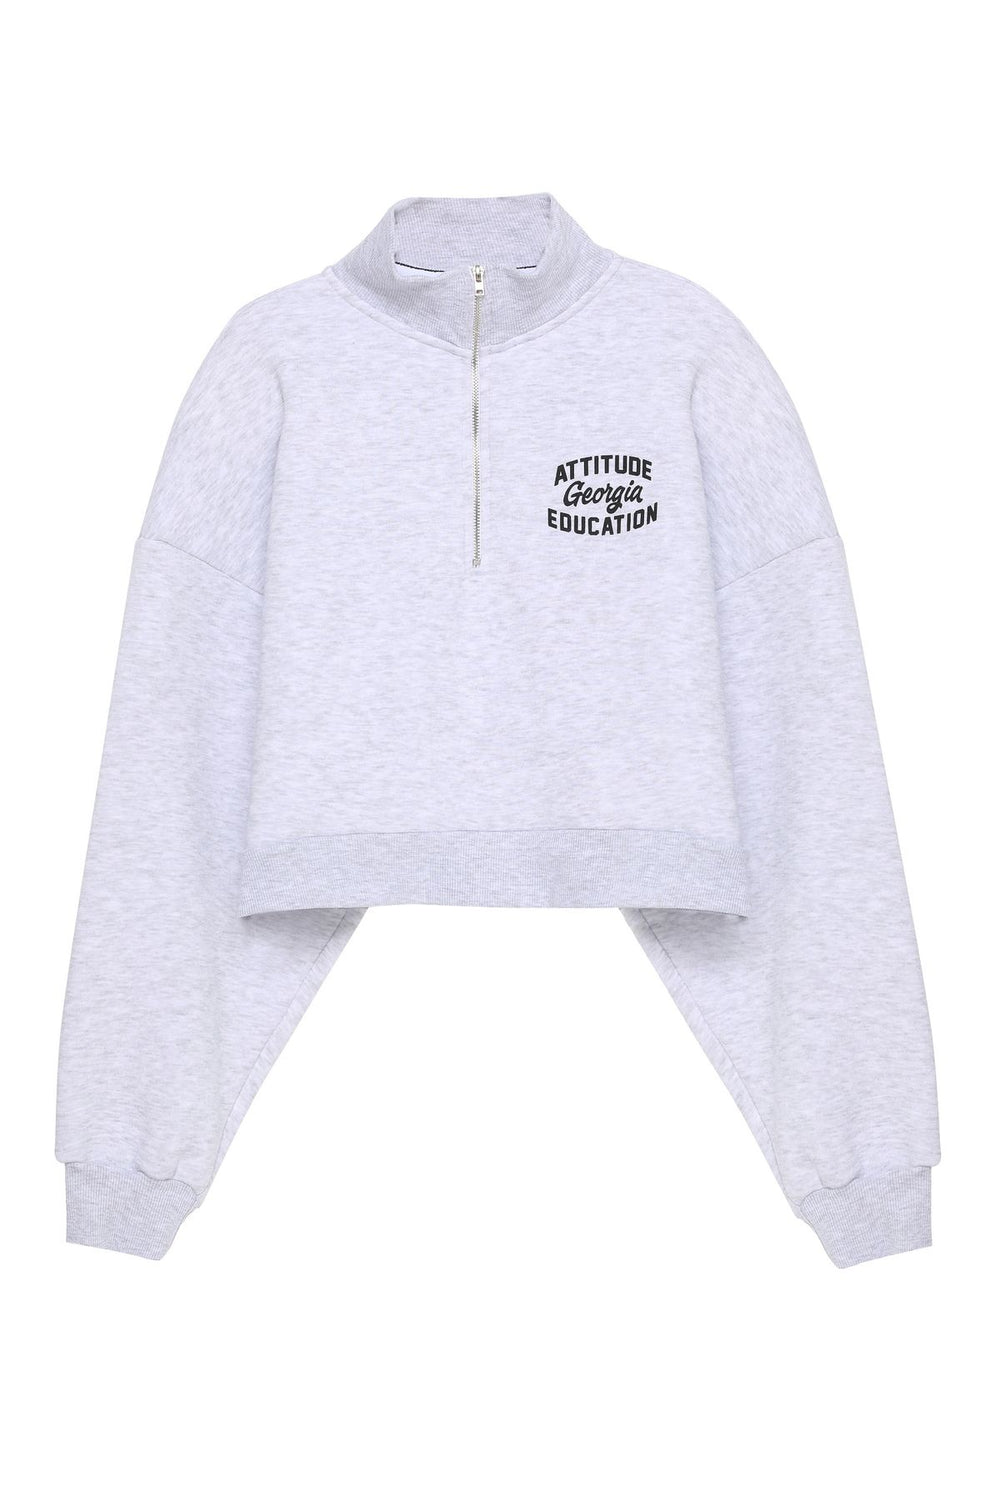 Crop Sweatshirt Gray with Text Printed on the Back